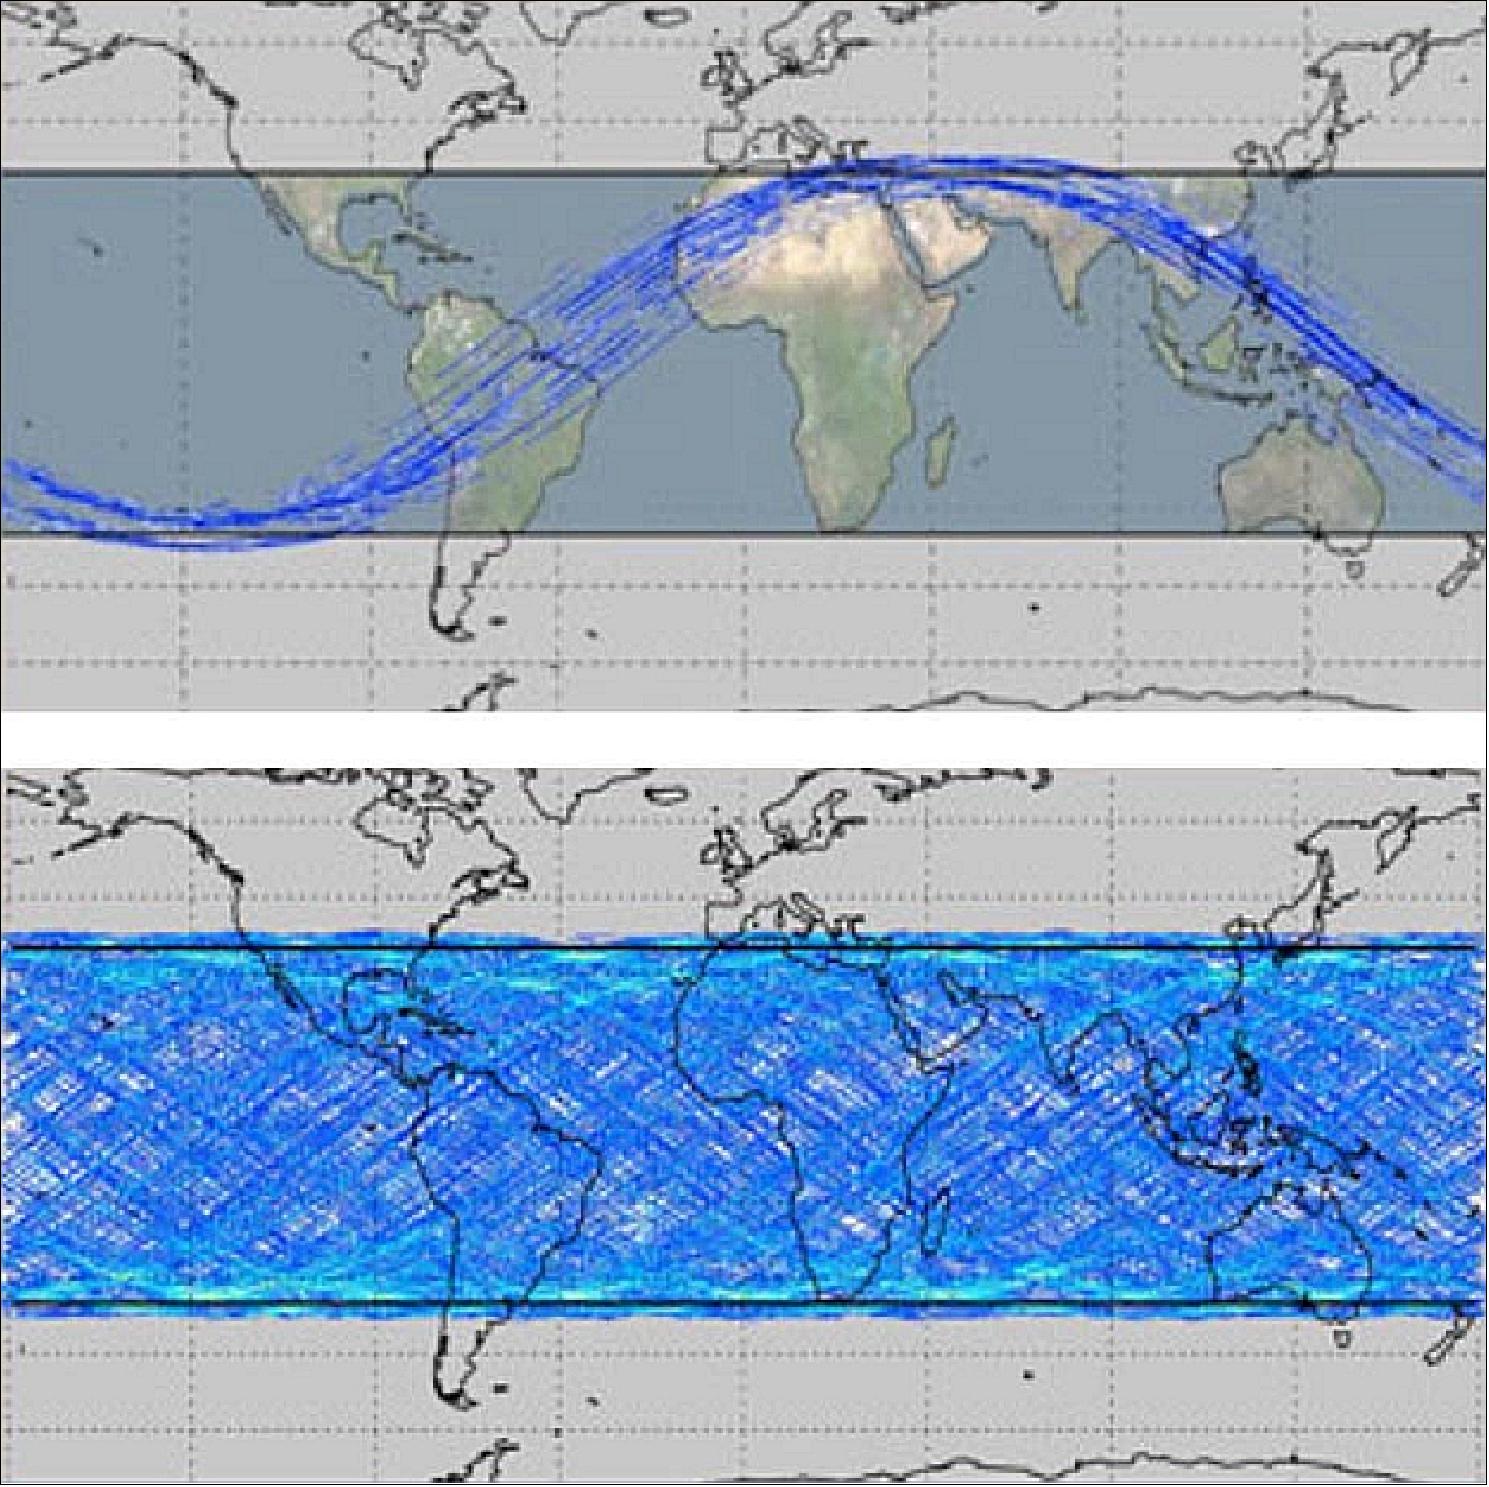 Figure 19: CYGNSS Earth coverages: Each LEO CYGNSS observatory will orbit at an inclination of 35º and be capable of measuring 4 simultaneous reflections, resulting in 32 wind measurements/s across the globe (image credit: UM, NASA)